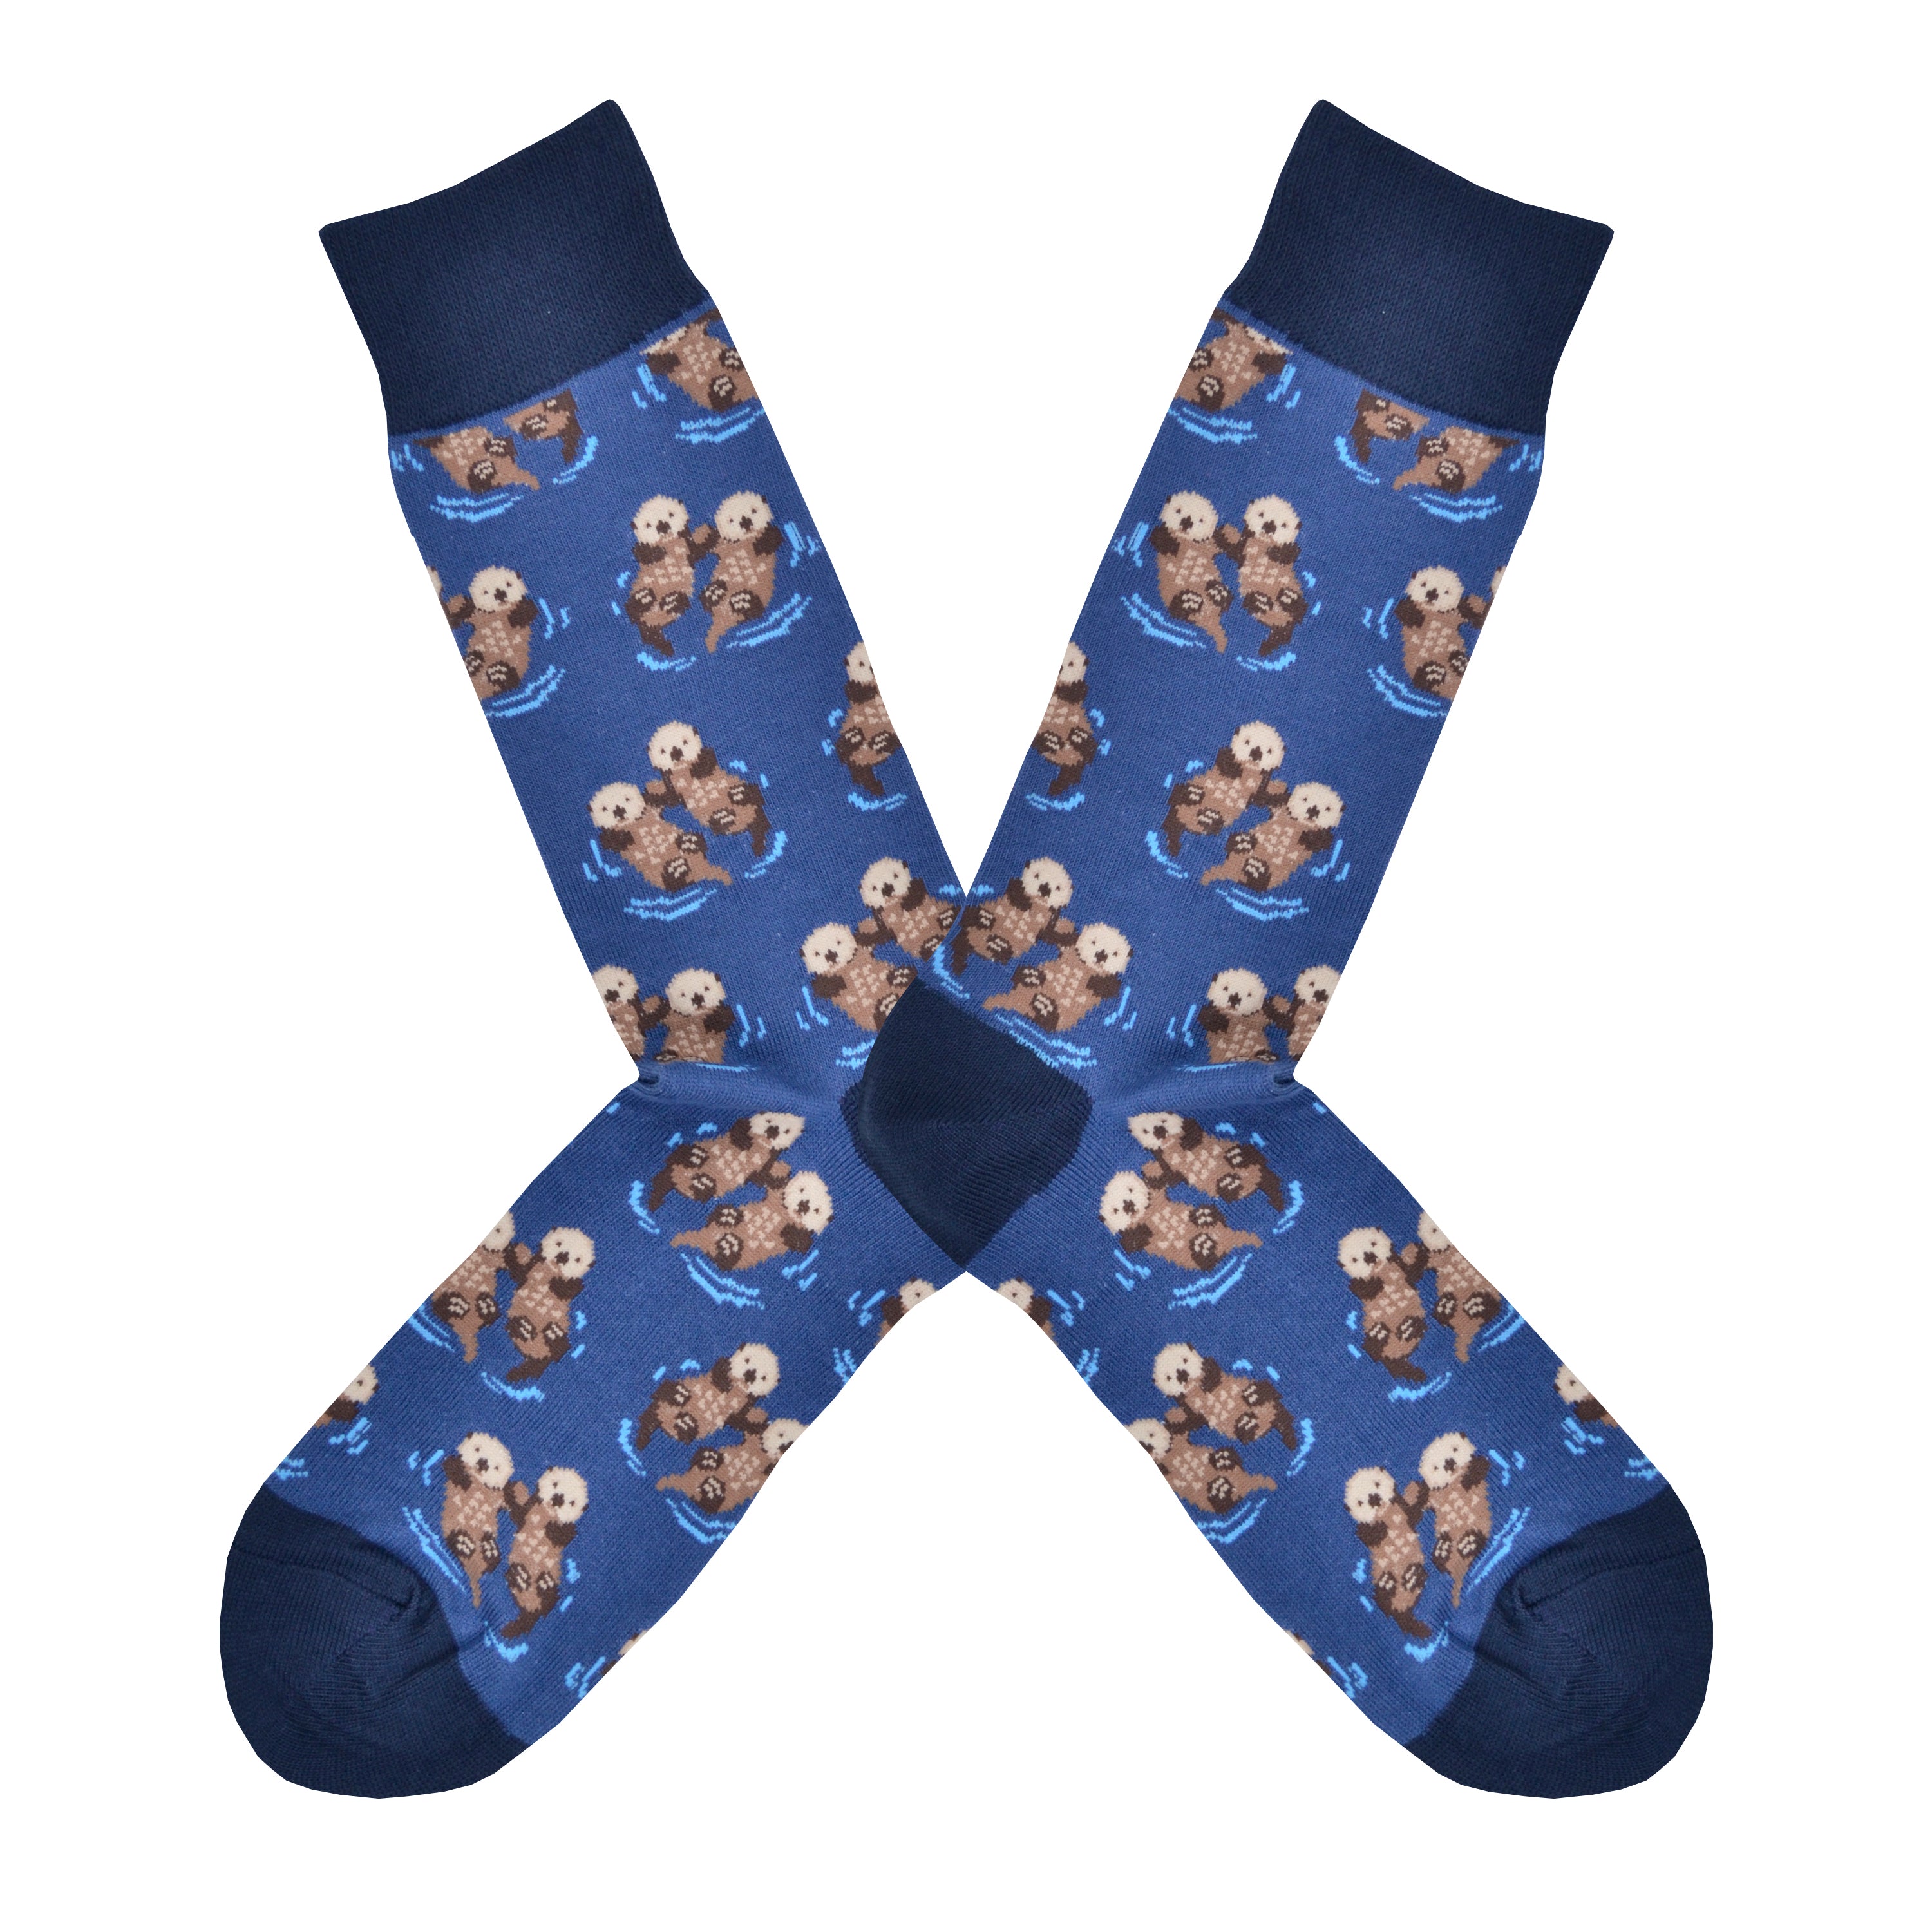 These blue cotton men's crew socks with a navy heel, toe and cuff by the brand Socksmith feature adorable otters floating in the ocean holding hands.